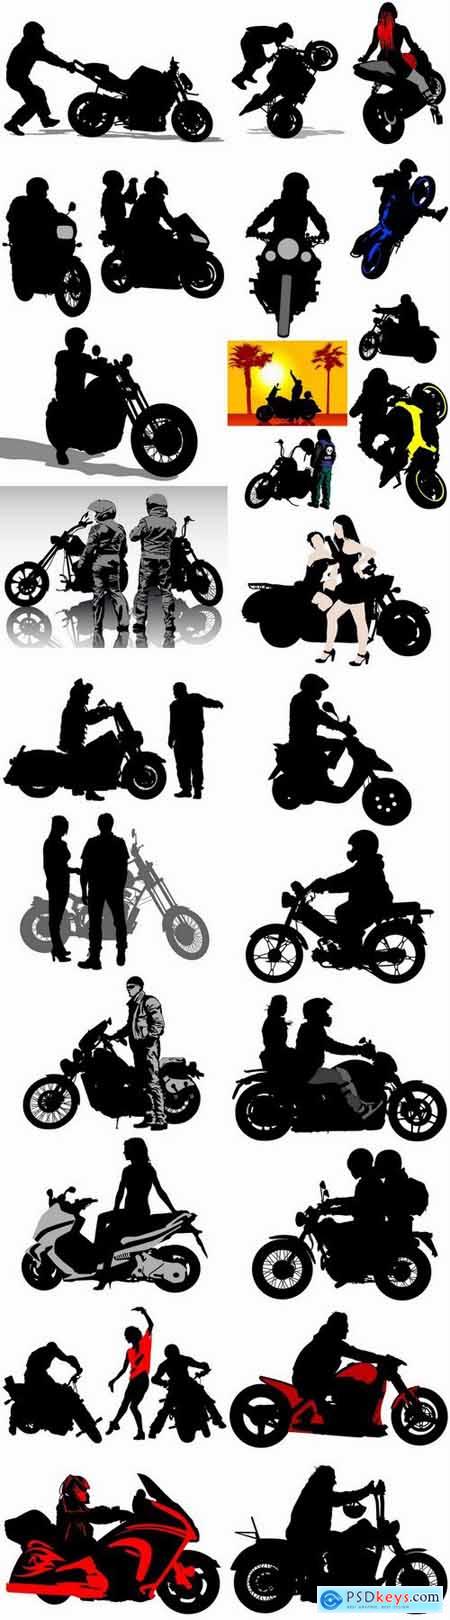 Various types of motorcycles 25 Eps